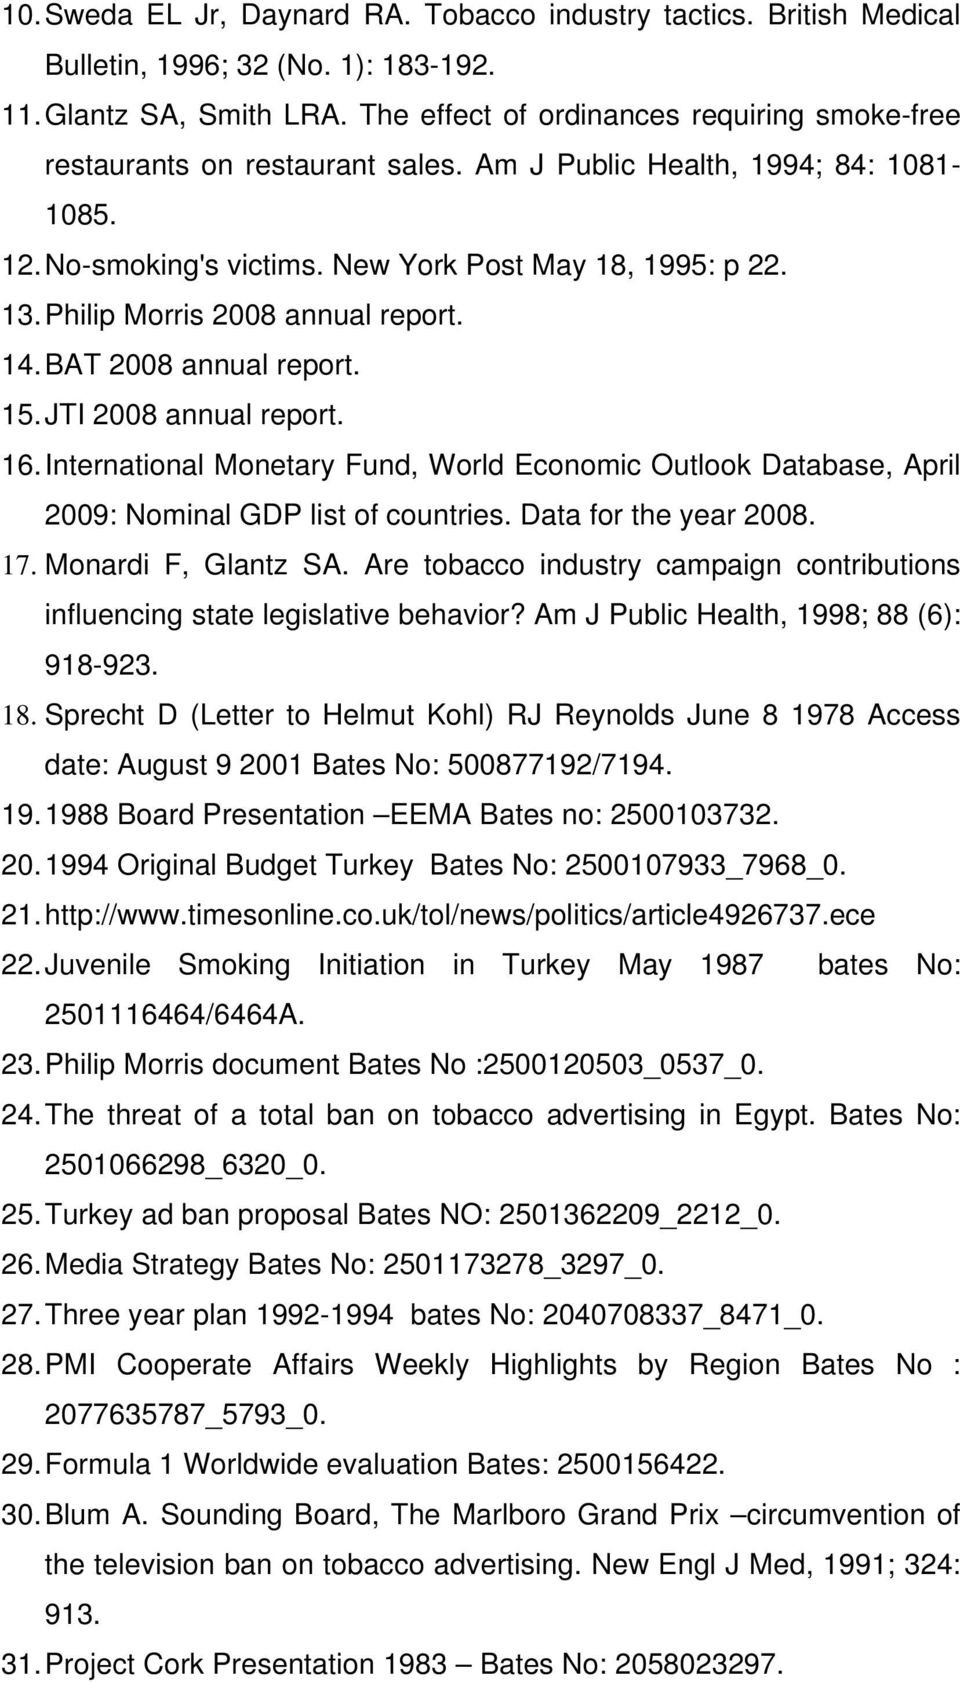 Philip Morris 2008 annual report. 14. BAT 2008 annual report. 15. JTI 2008 annual report. 16. International Monetary Fund, World Economic Outlook Database, April 2009: Nominal GDP list of countries.